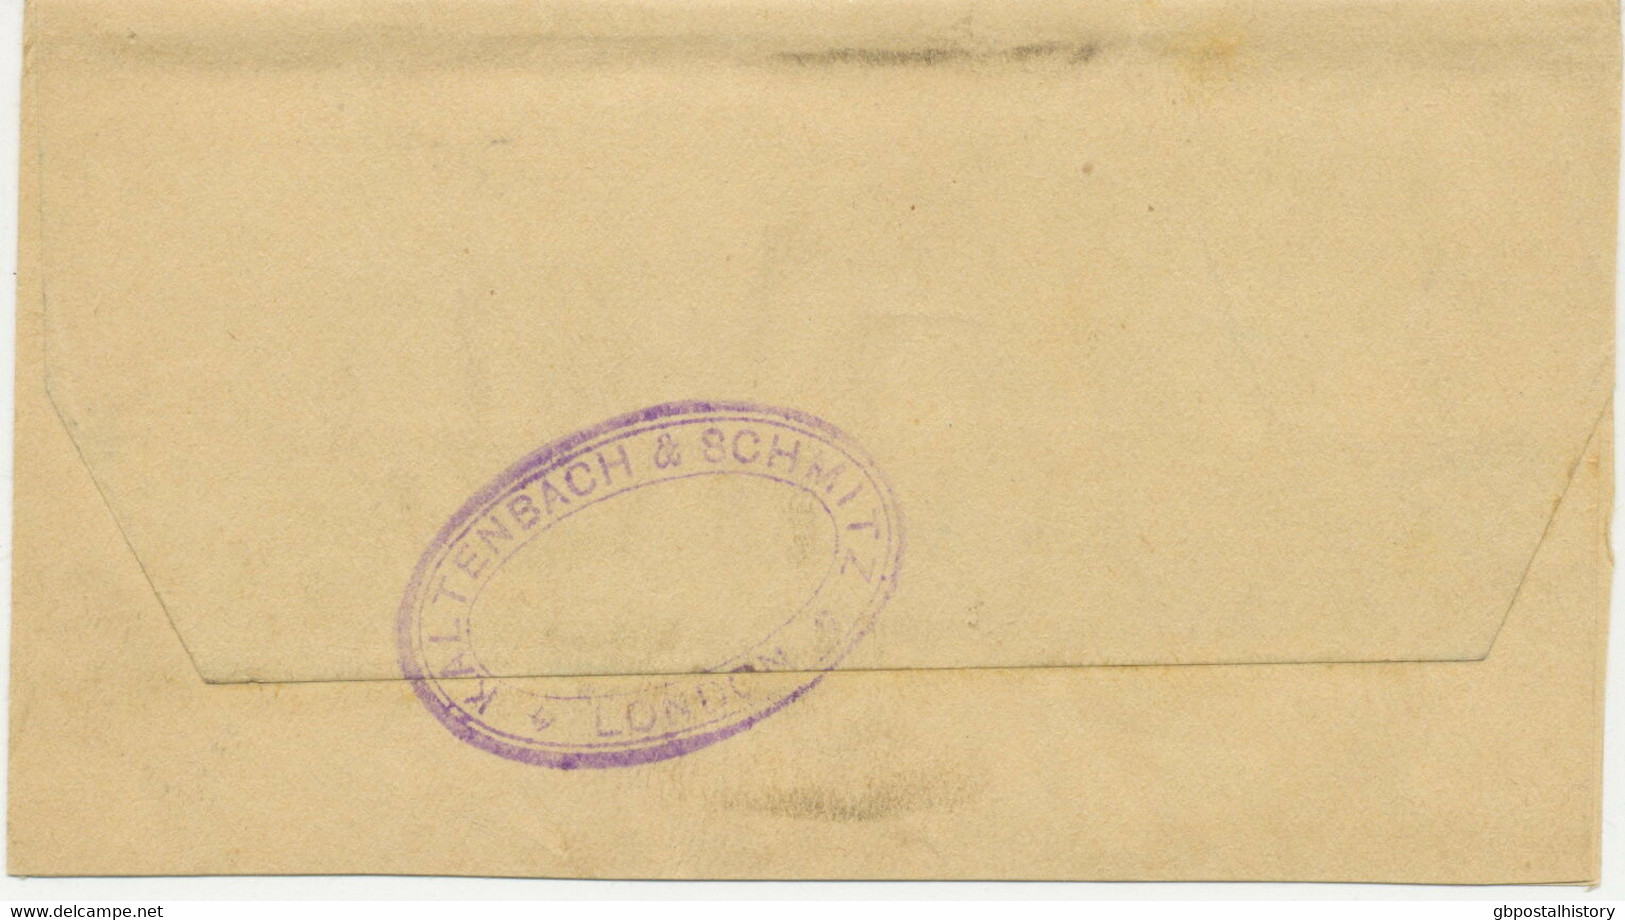 GB 189? QV 1/2 D Wrapper Uprated W 1/2 D Jubilee From LONDON "FB" To SINGAPORE - Storia Postale